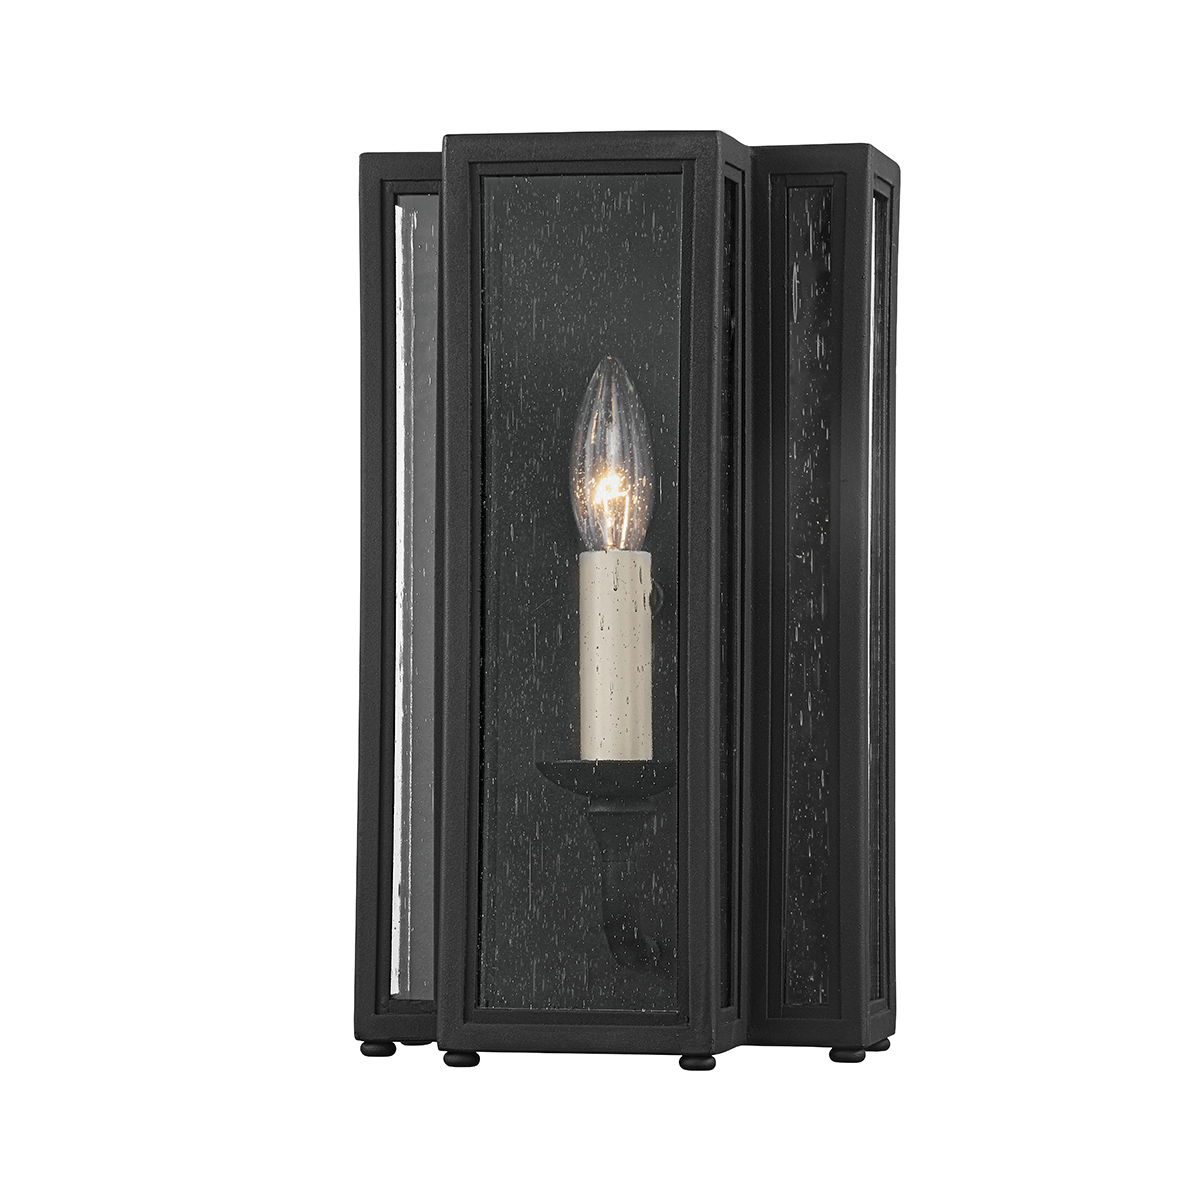 Troy LEOR 1 LIGHT SMALL EXTERIOR WALL SCONCE B3601 Outdoor l Wall Troy Lighting   